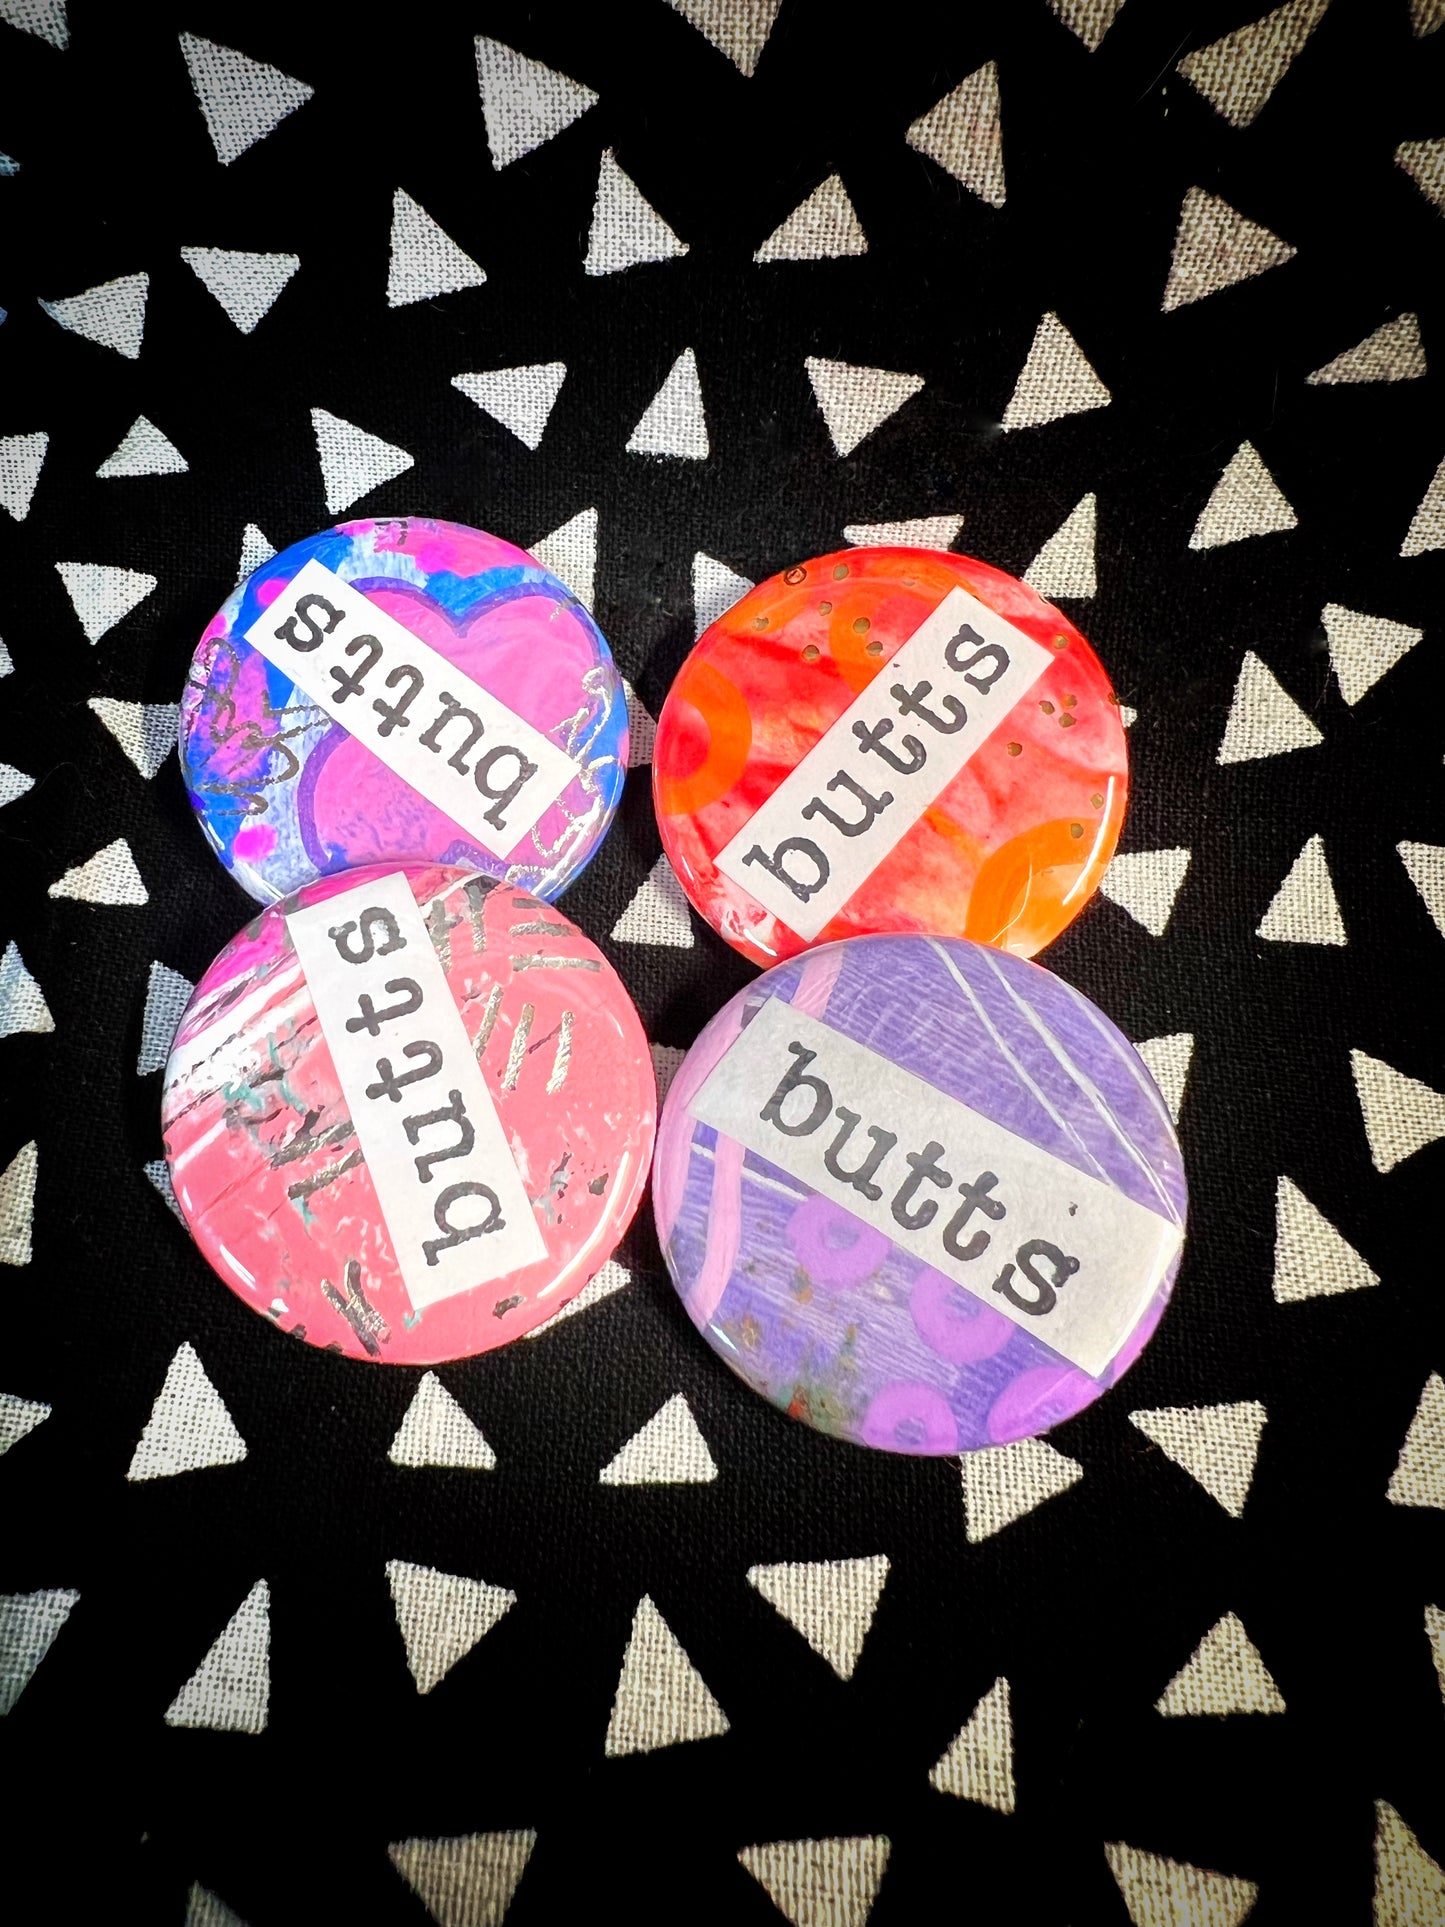 "butts" - small art pin / magnet